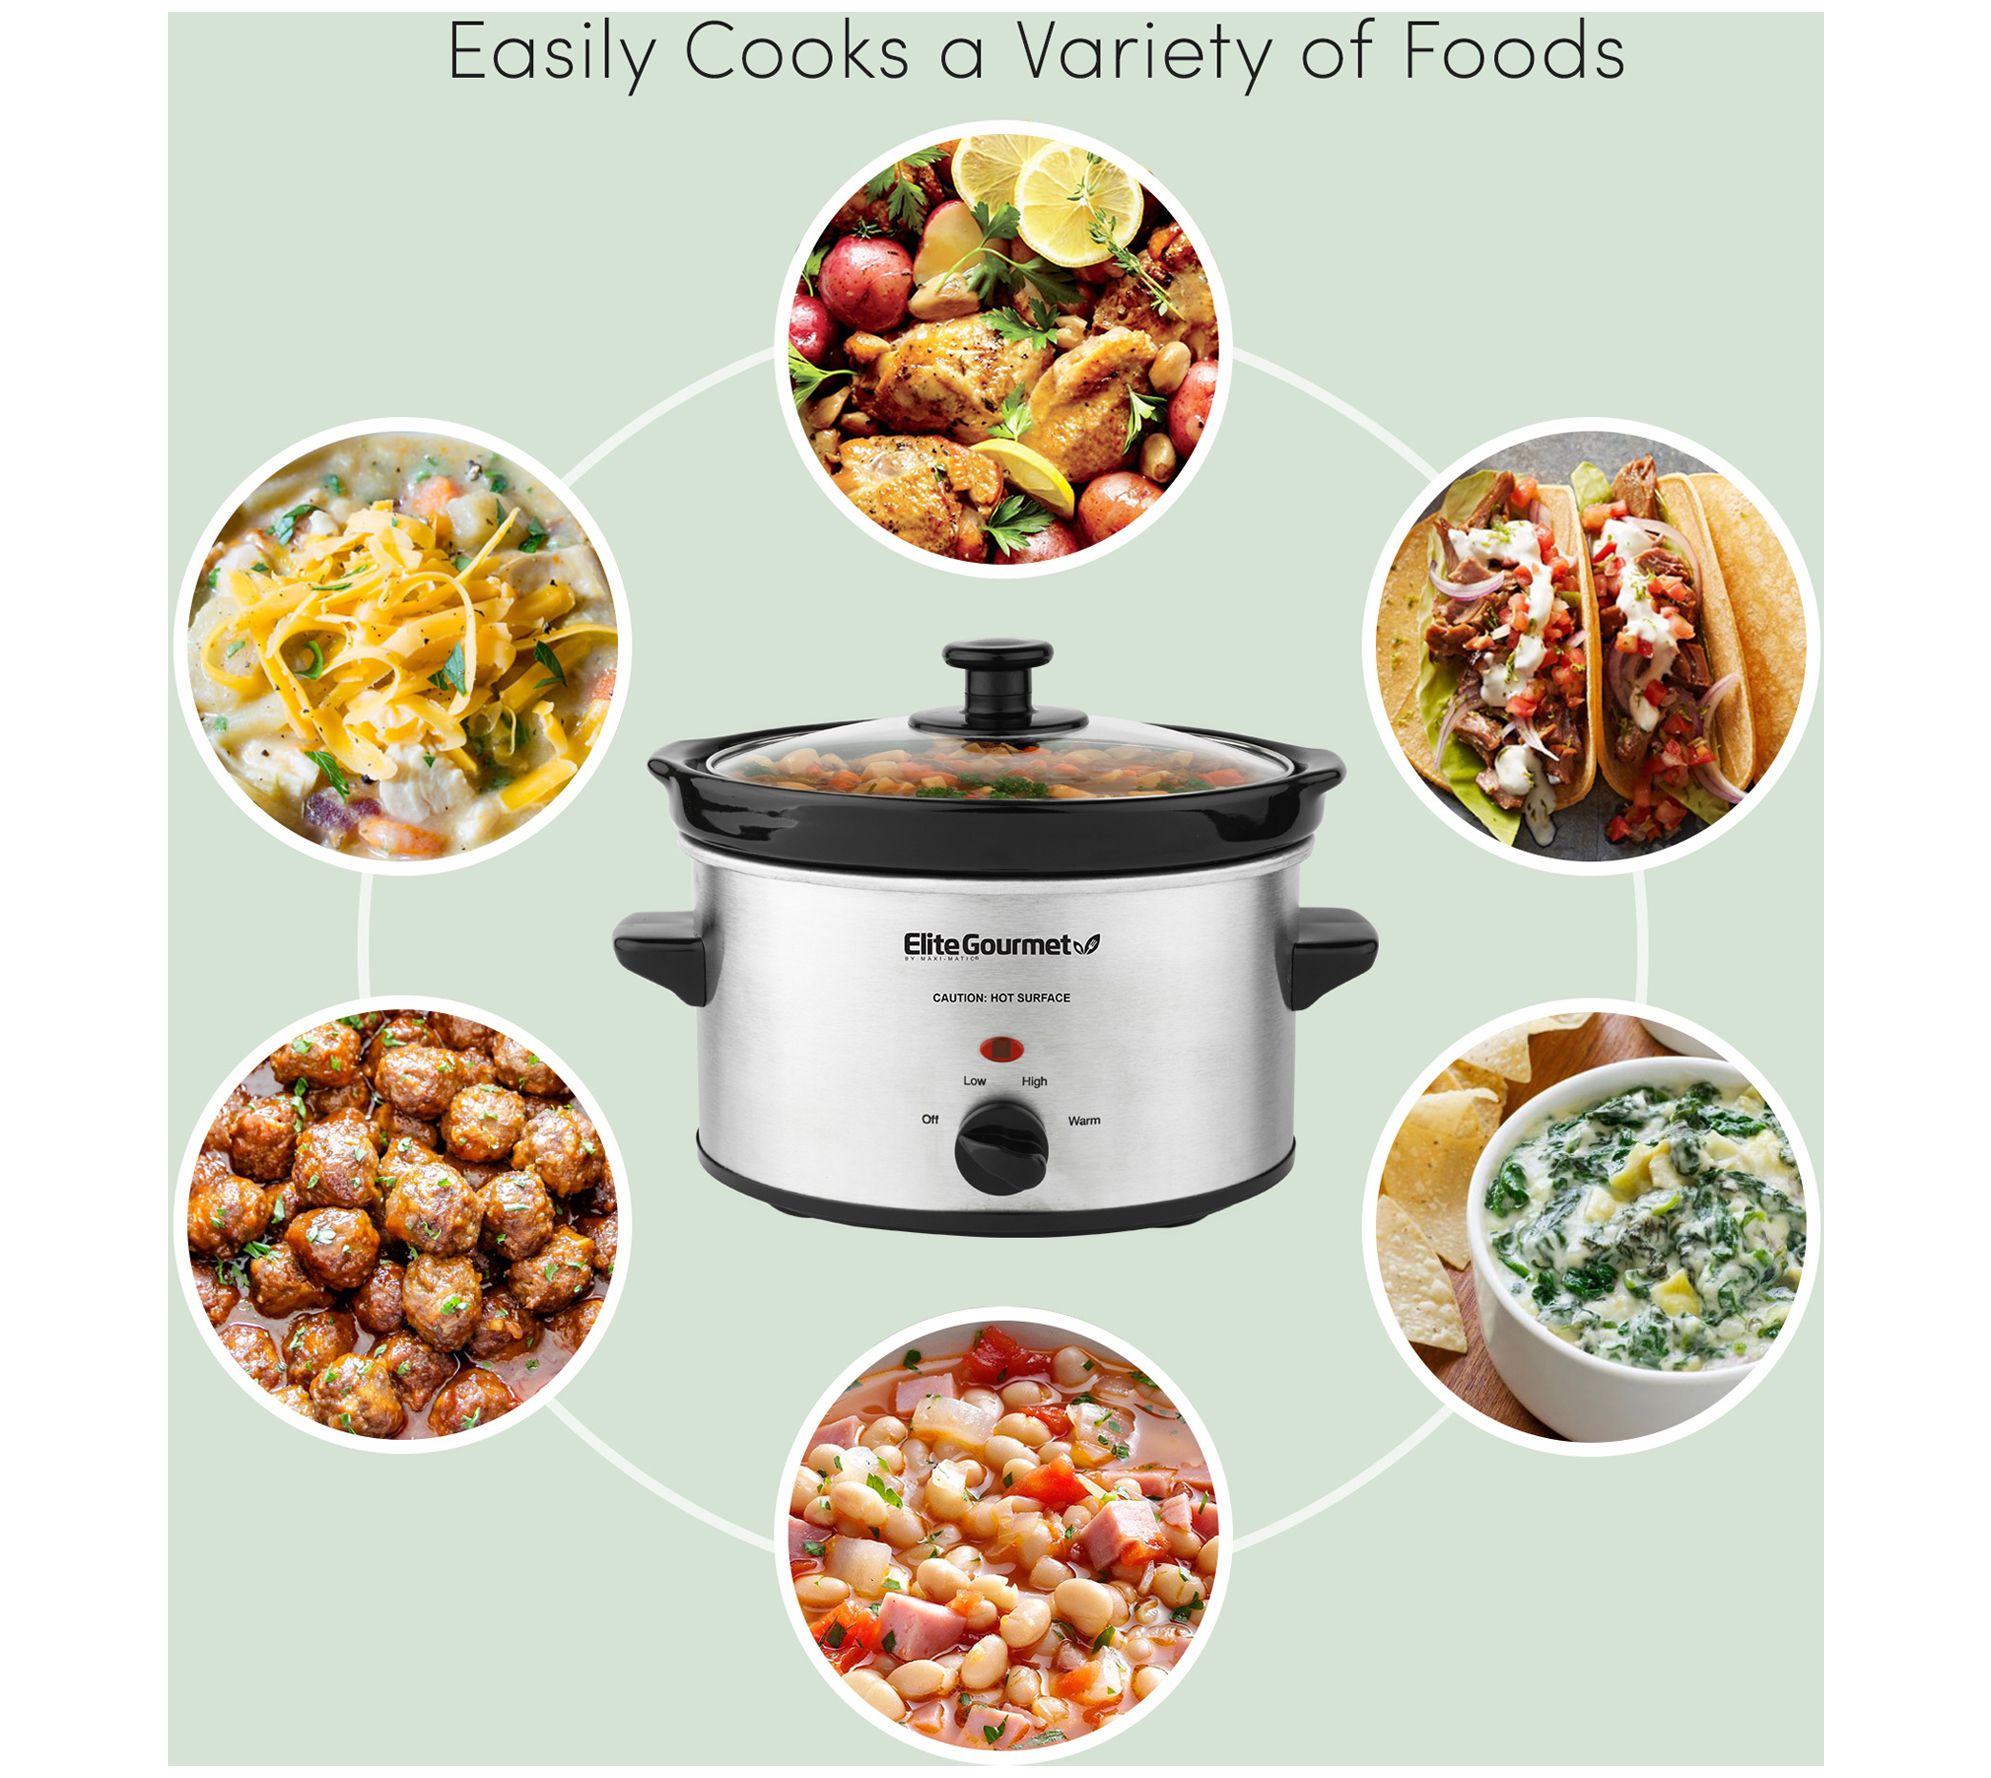 Elite Gourmet MST-250XS Electric Slow Cooker Stainless Steel, 1.5 Quart